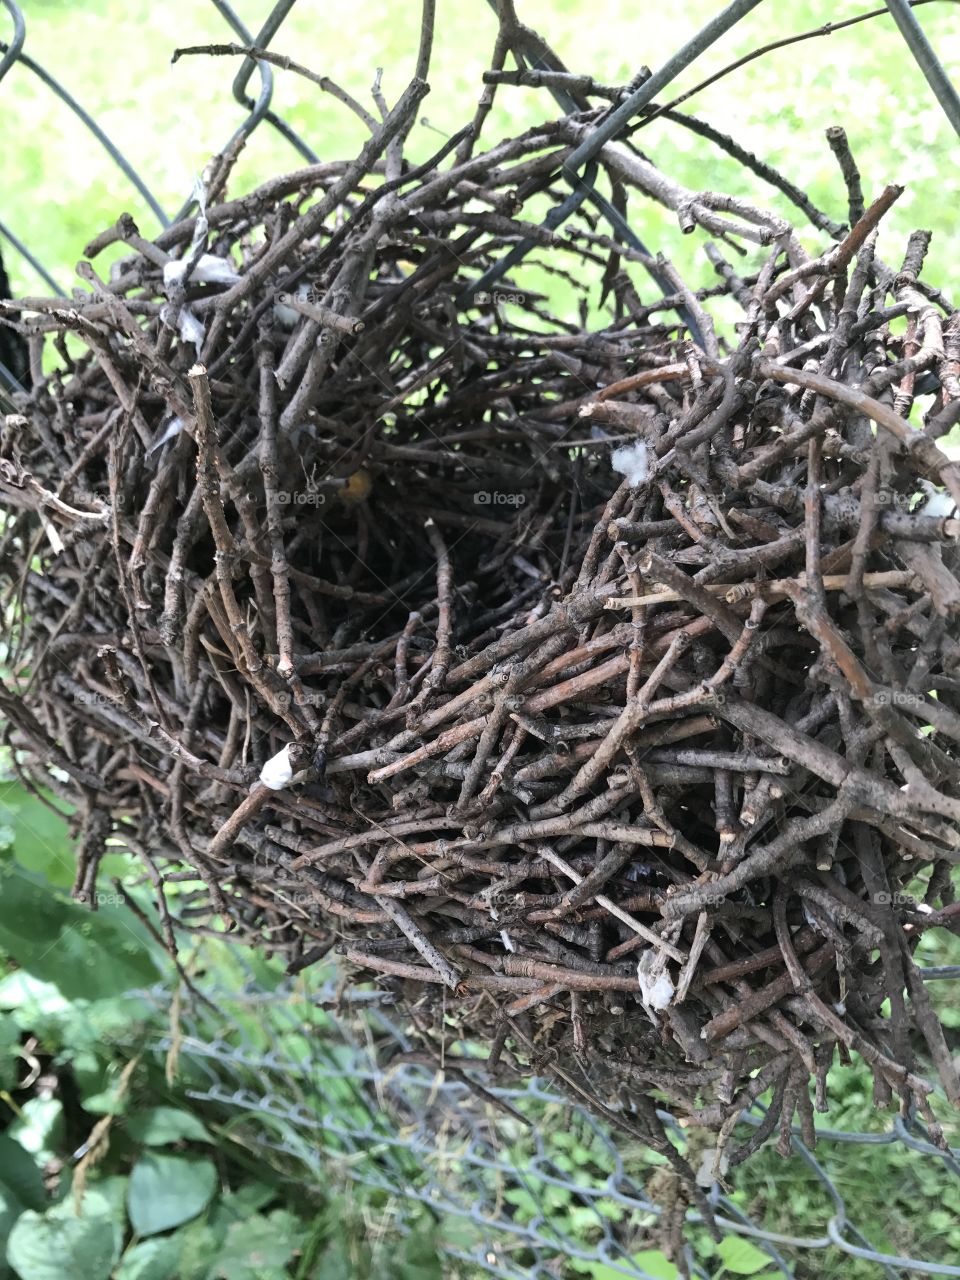 Nest in a fence